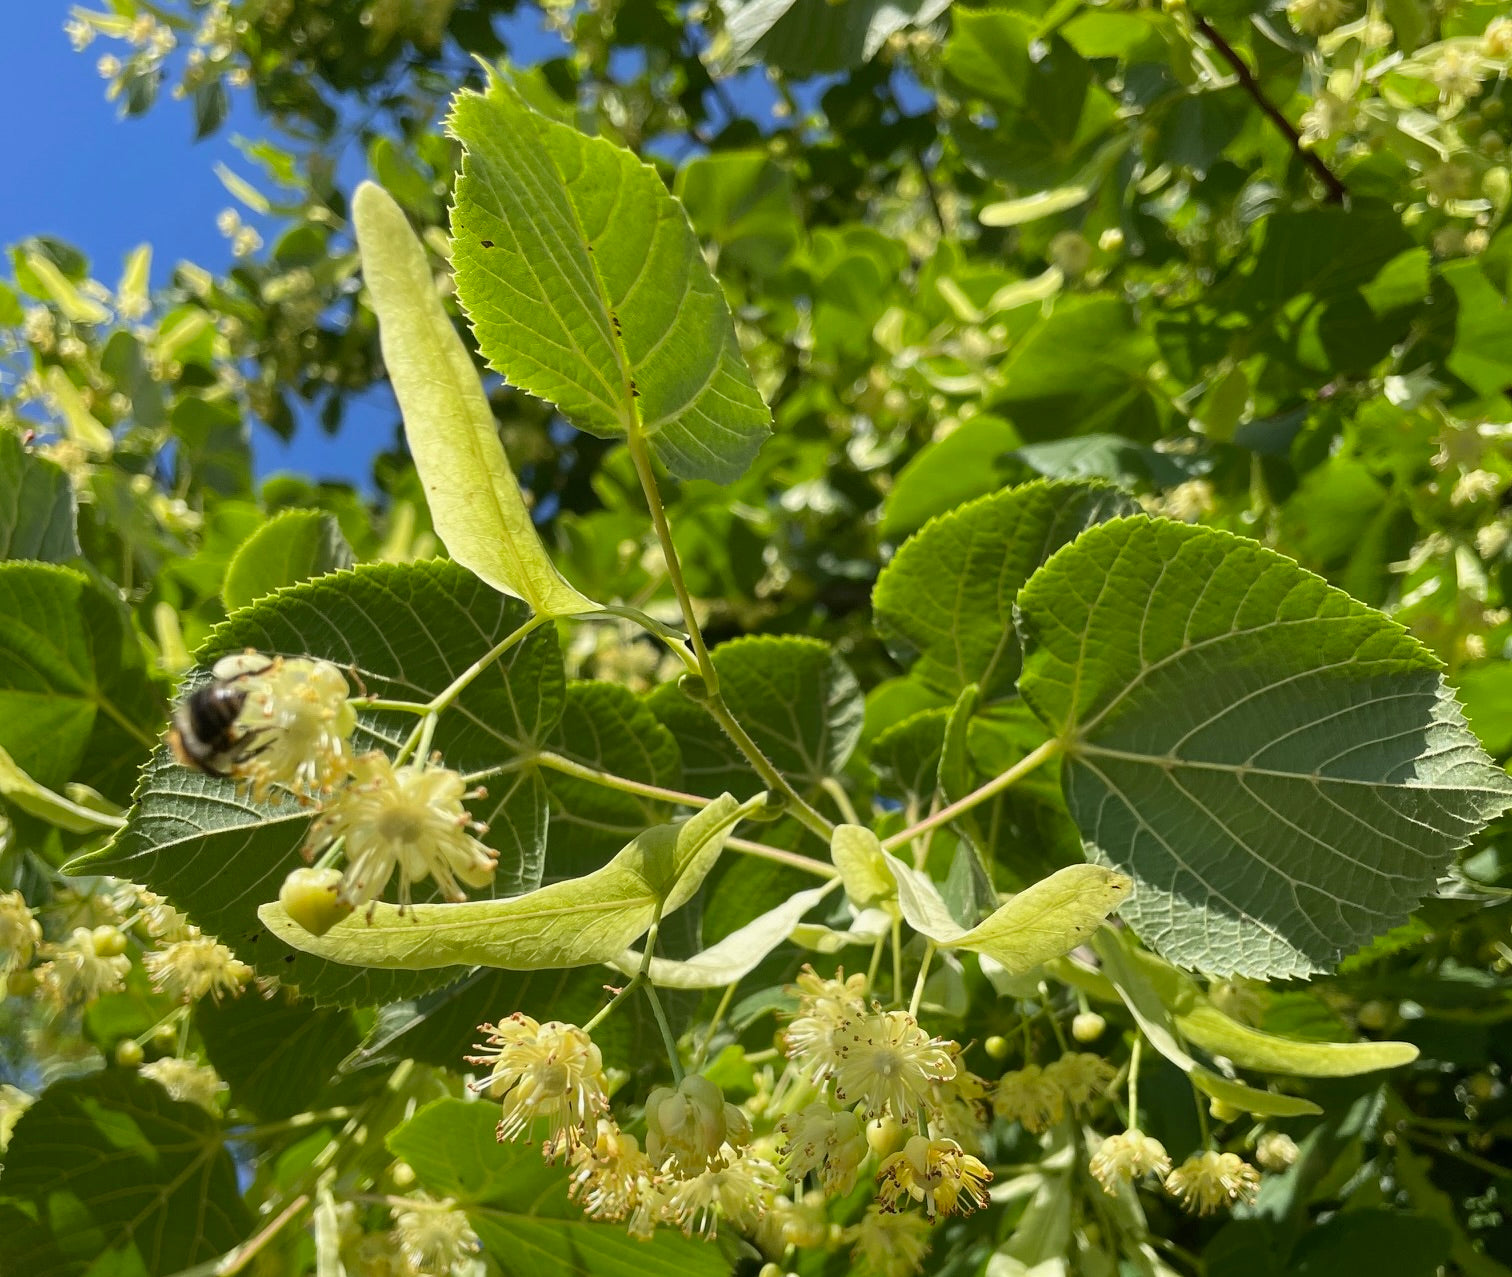 A bee lands on the blossom of the small-leaved lime